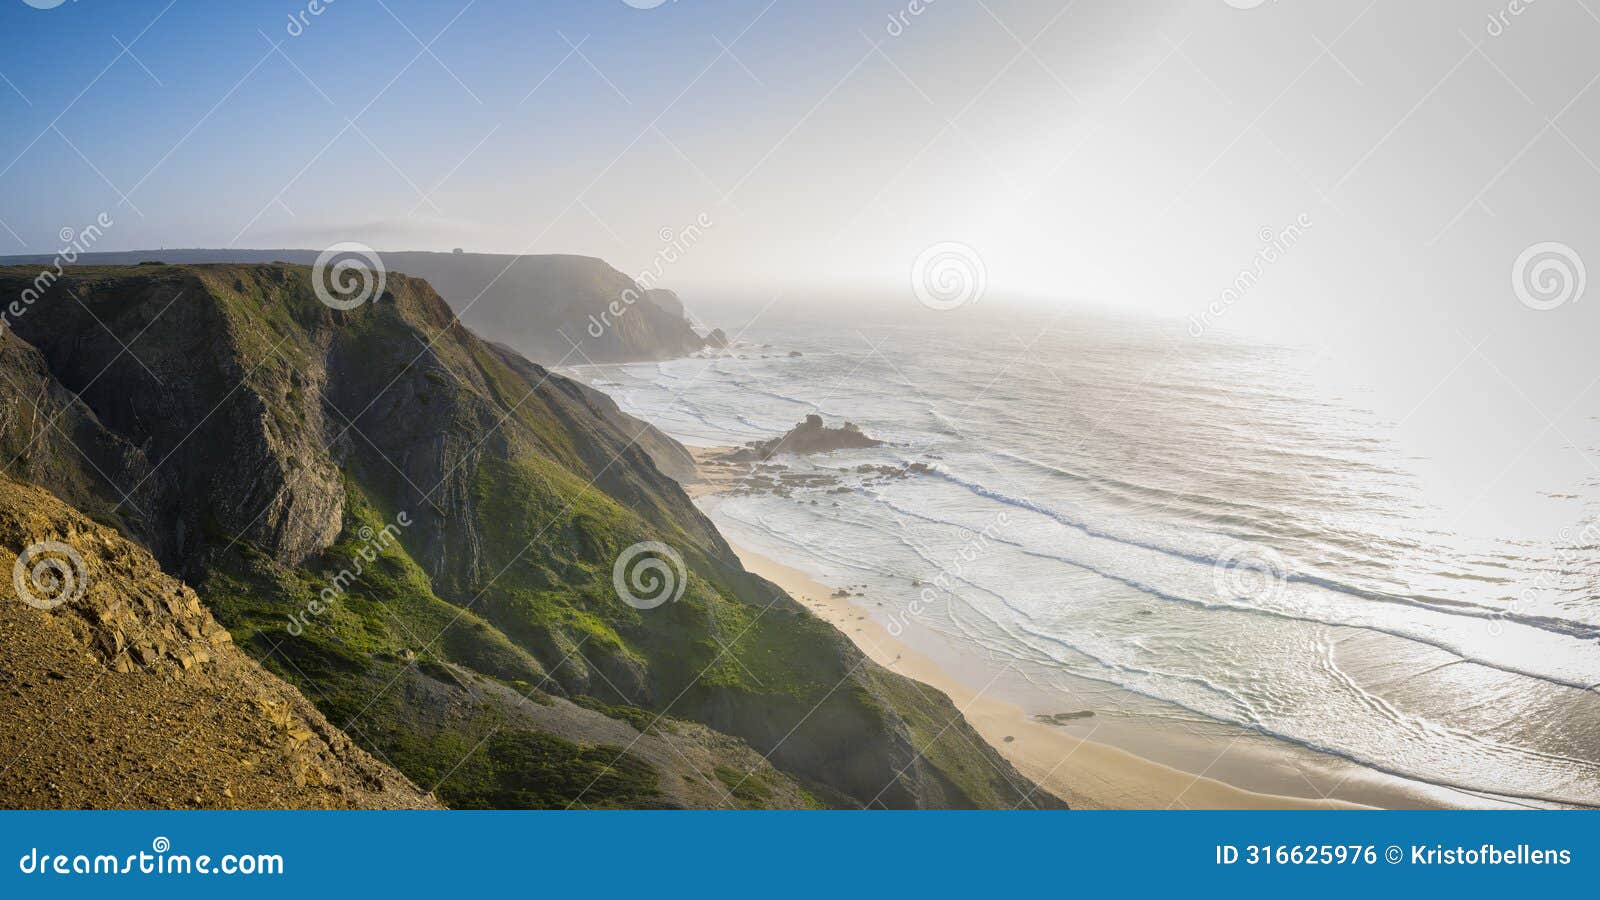 view of the dramatic coastline of bordeira near carrapateira on the costa vicentina in the algarve in portugal